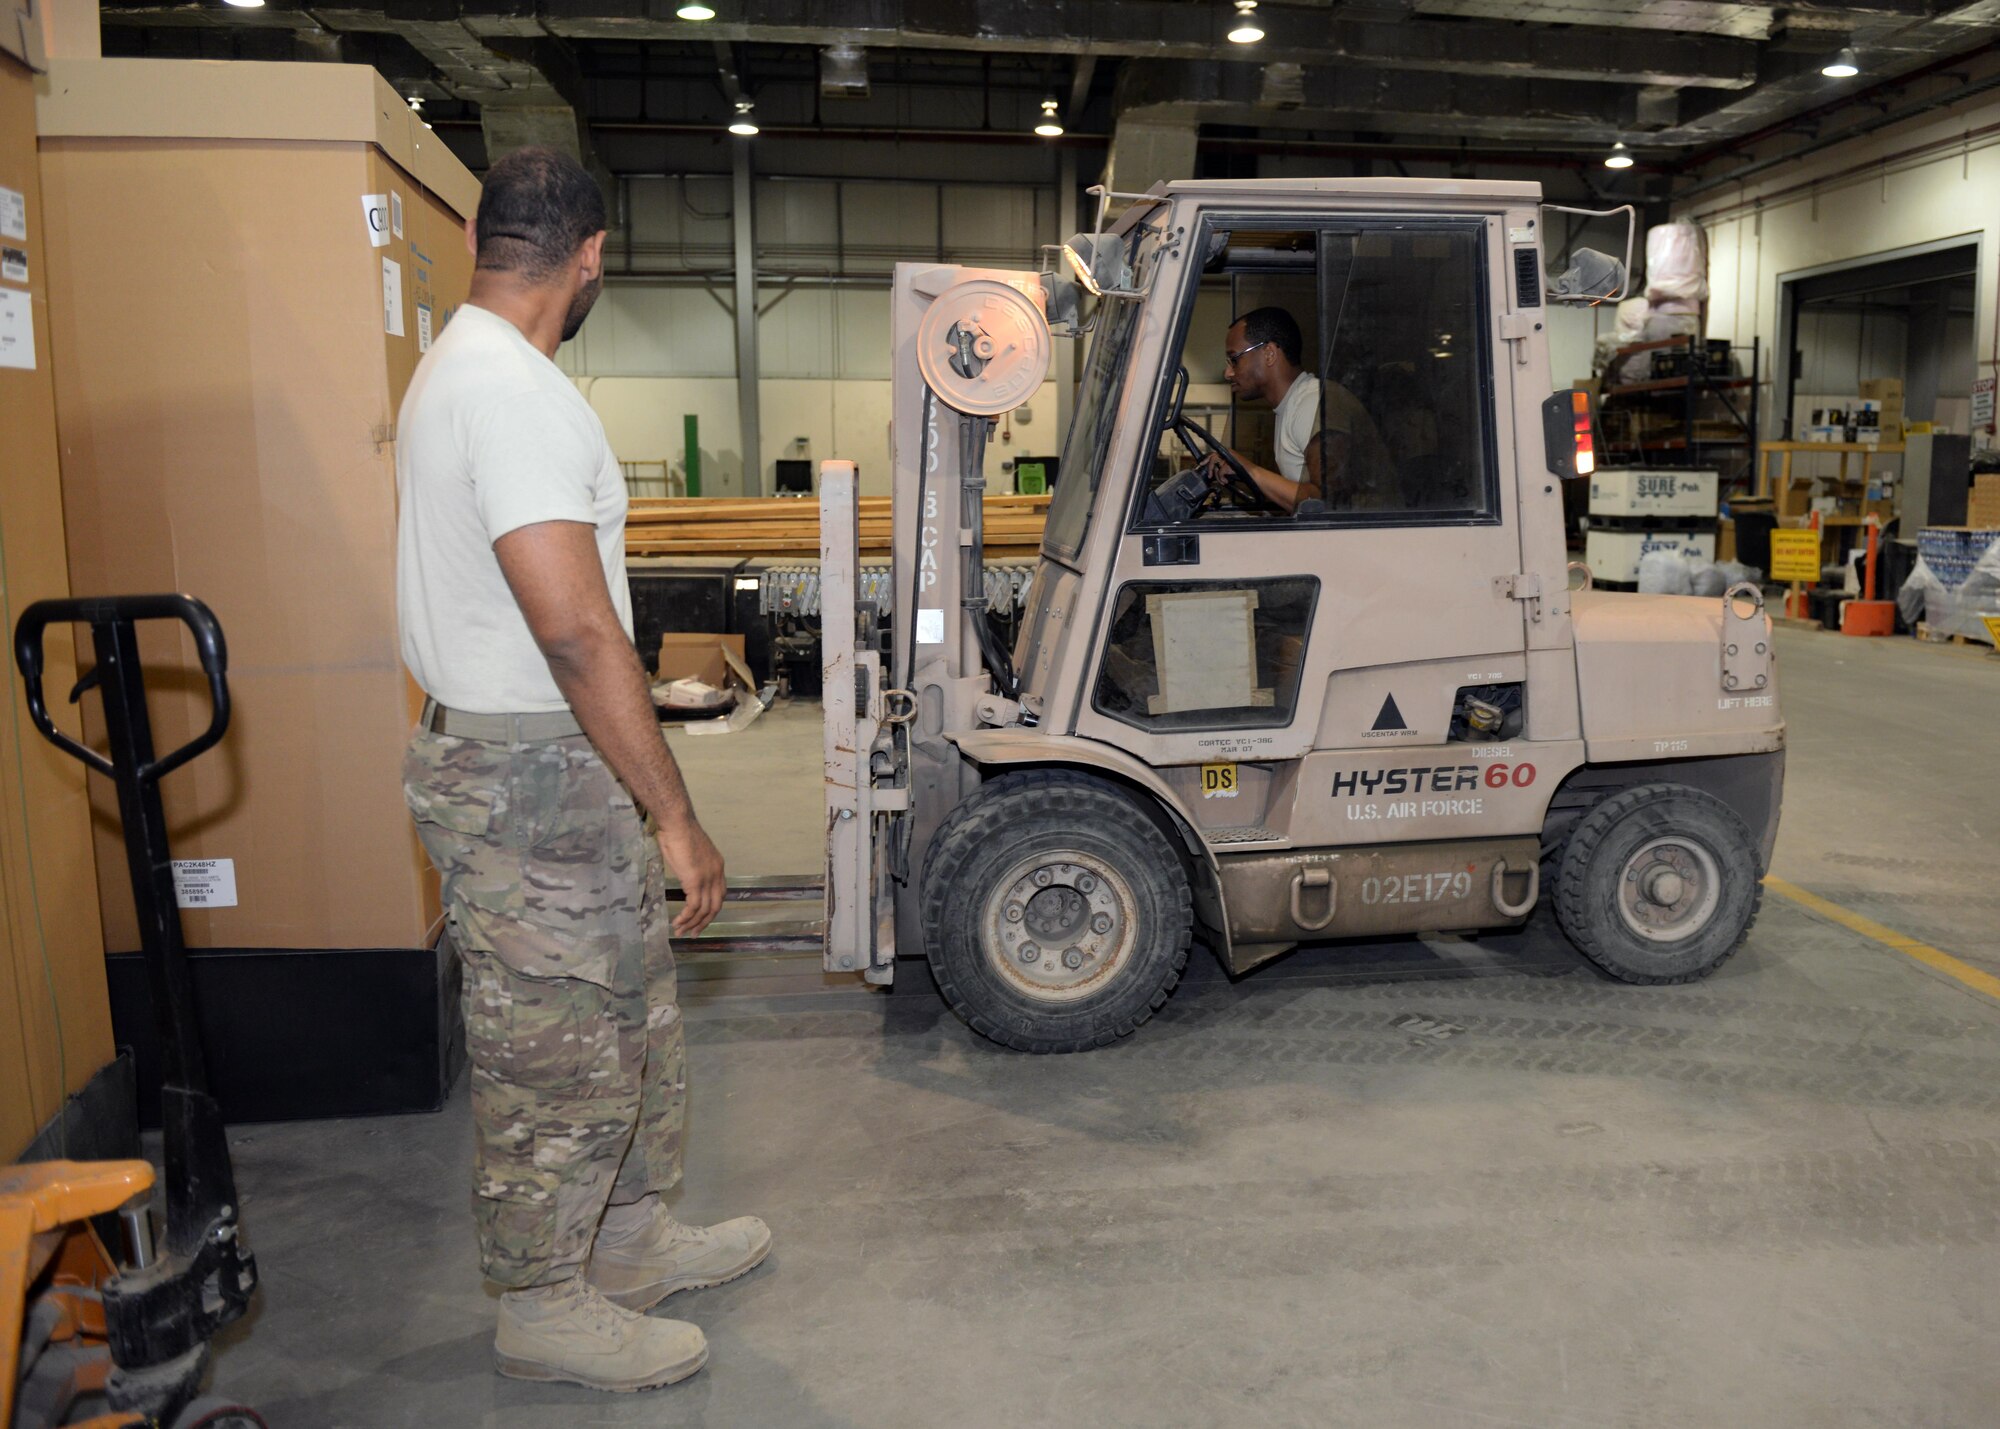 U.S. Airmen from the 455th Expeditionary Logistics Readiness Squadron Traffic Management Office bring in new material July 21, 2015, at Bagram Airfield, Afghanistan. The team is responsible for ensuring all shipments from the AOR to include hazardous and classified materials as well as aircraft parts are ready for transport. (U.S. Air Force photo by Senior Airman Cierra Presentado/Released)